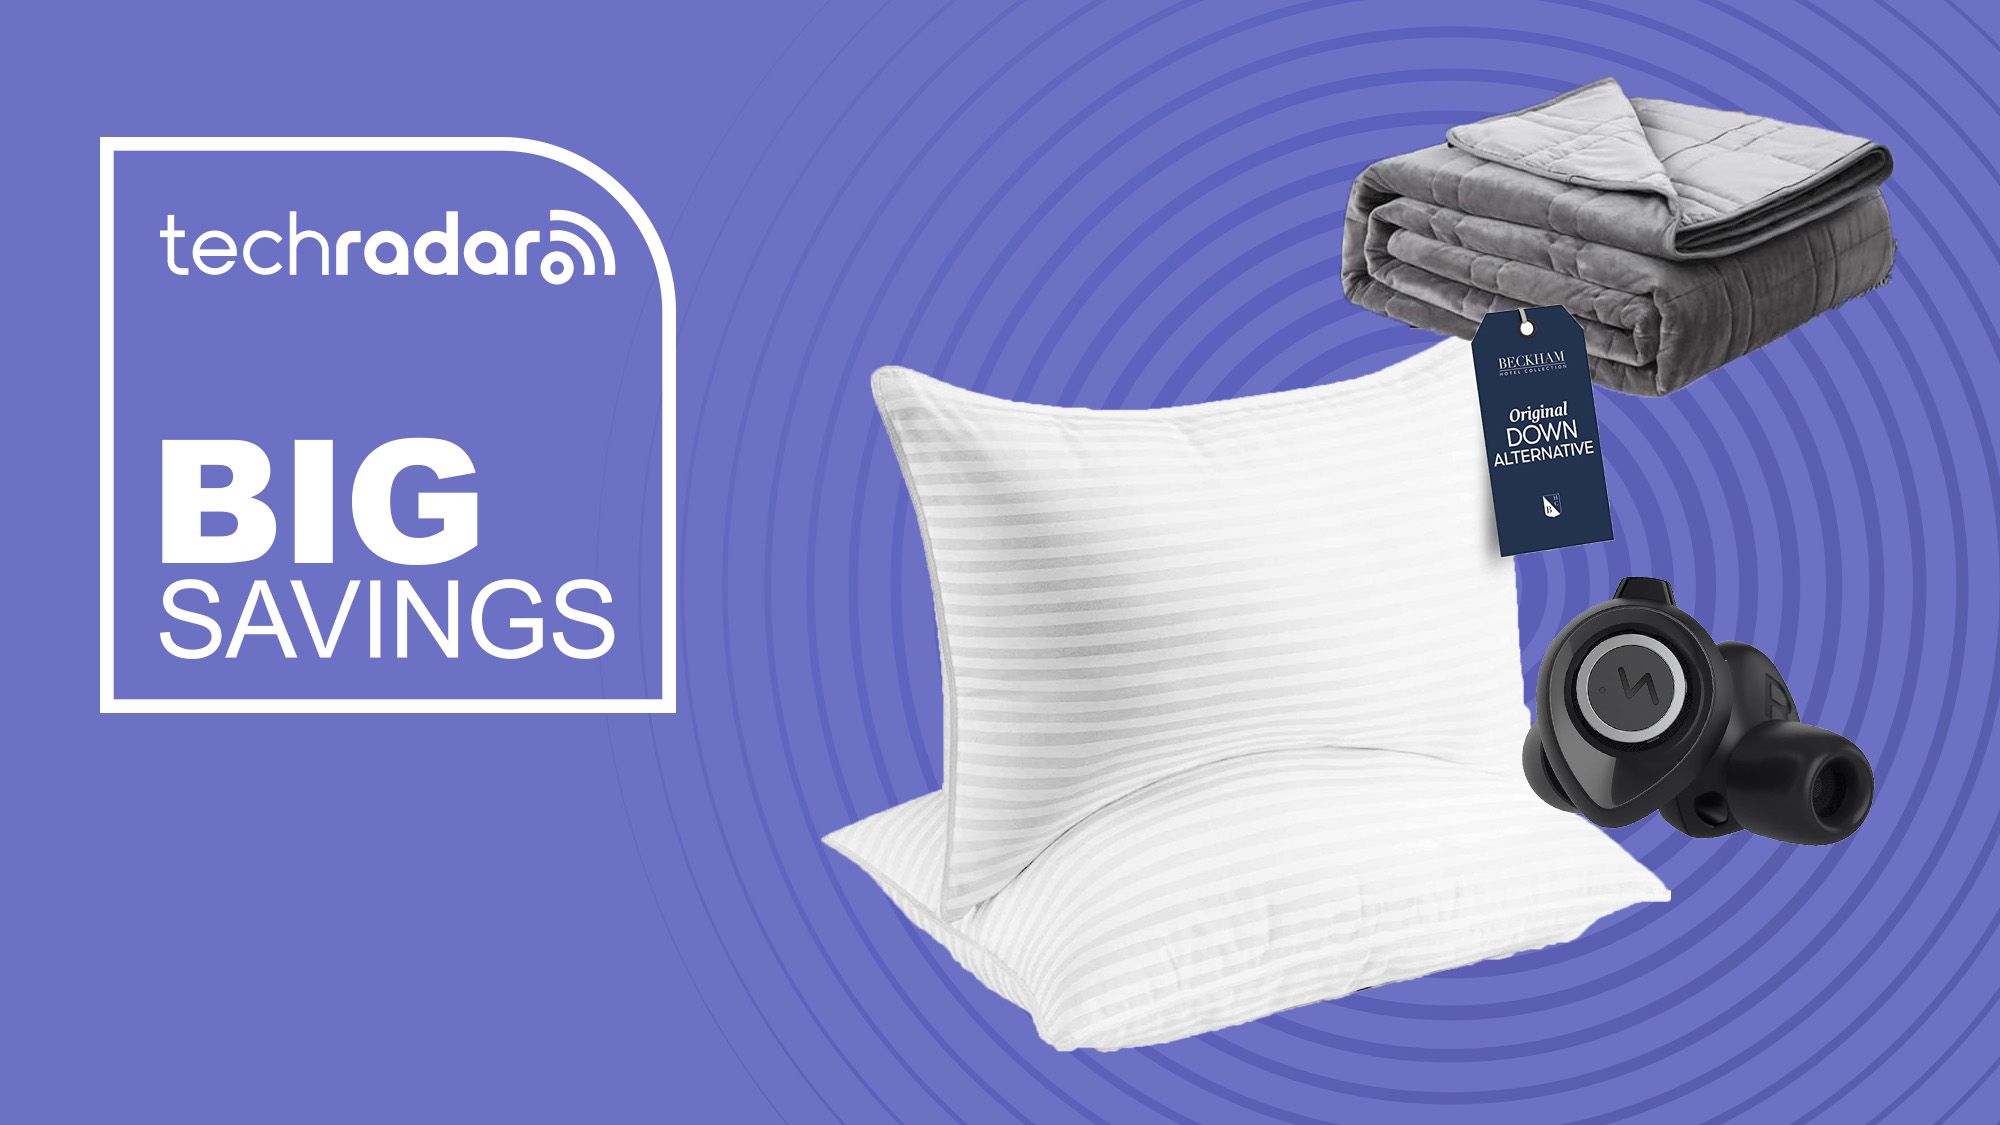 Shop Beckham Hotel pillows at 36% off for October Prime Day